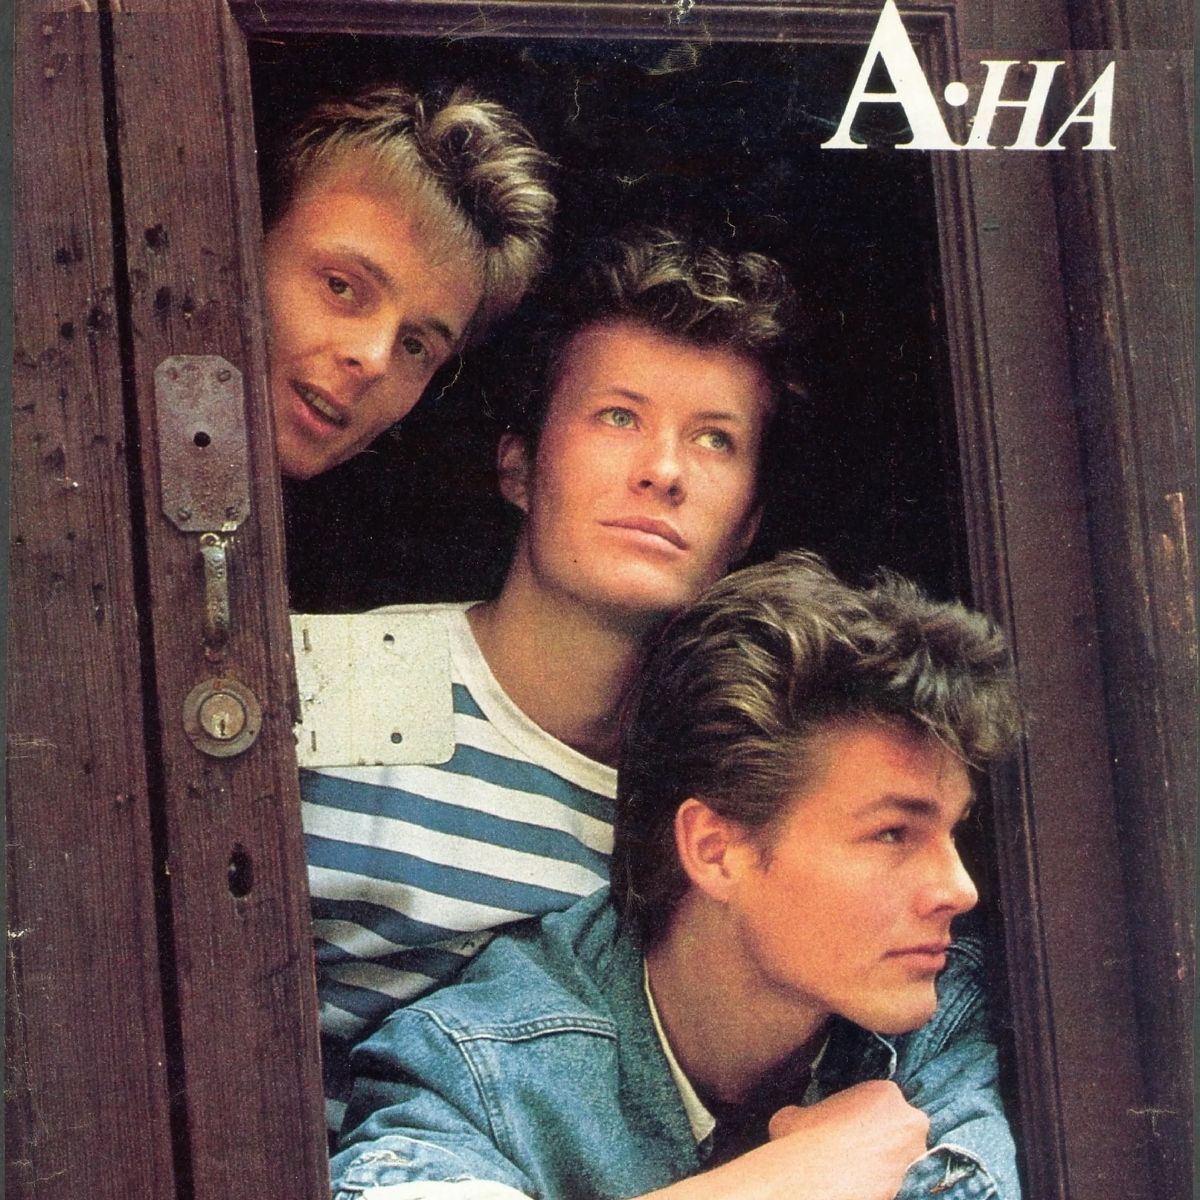 Norwegian band "A-ha" in their youth